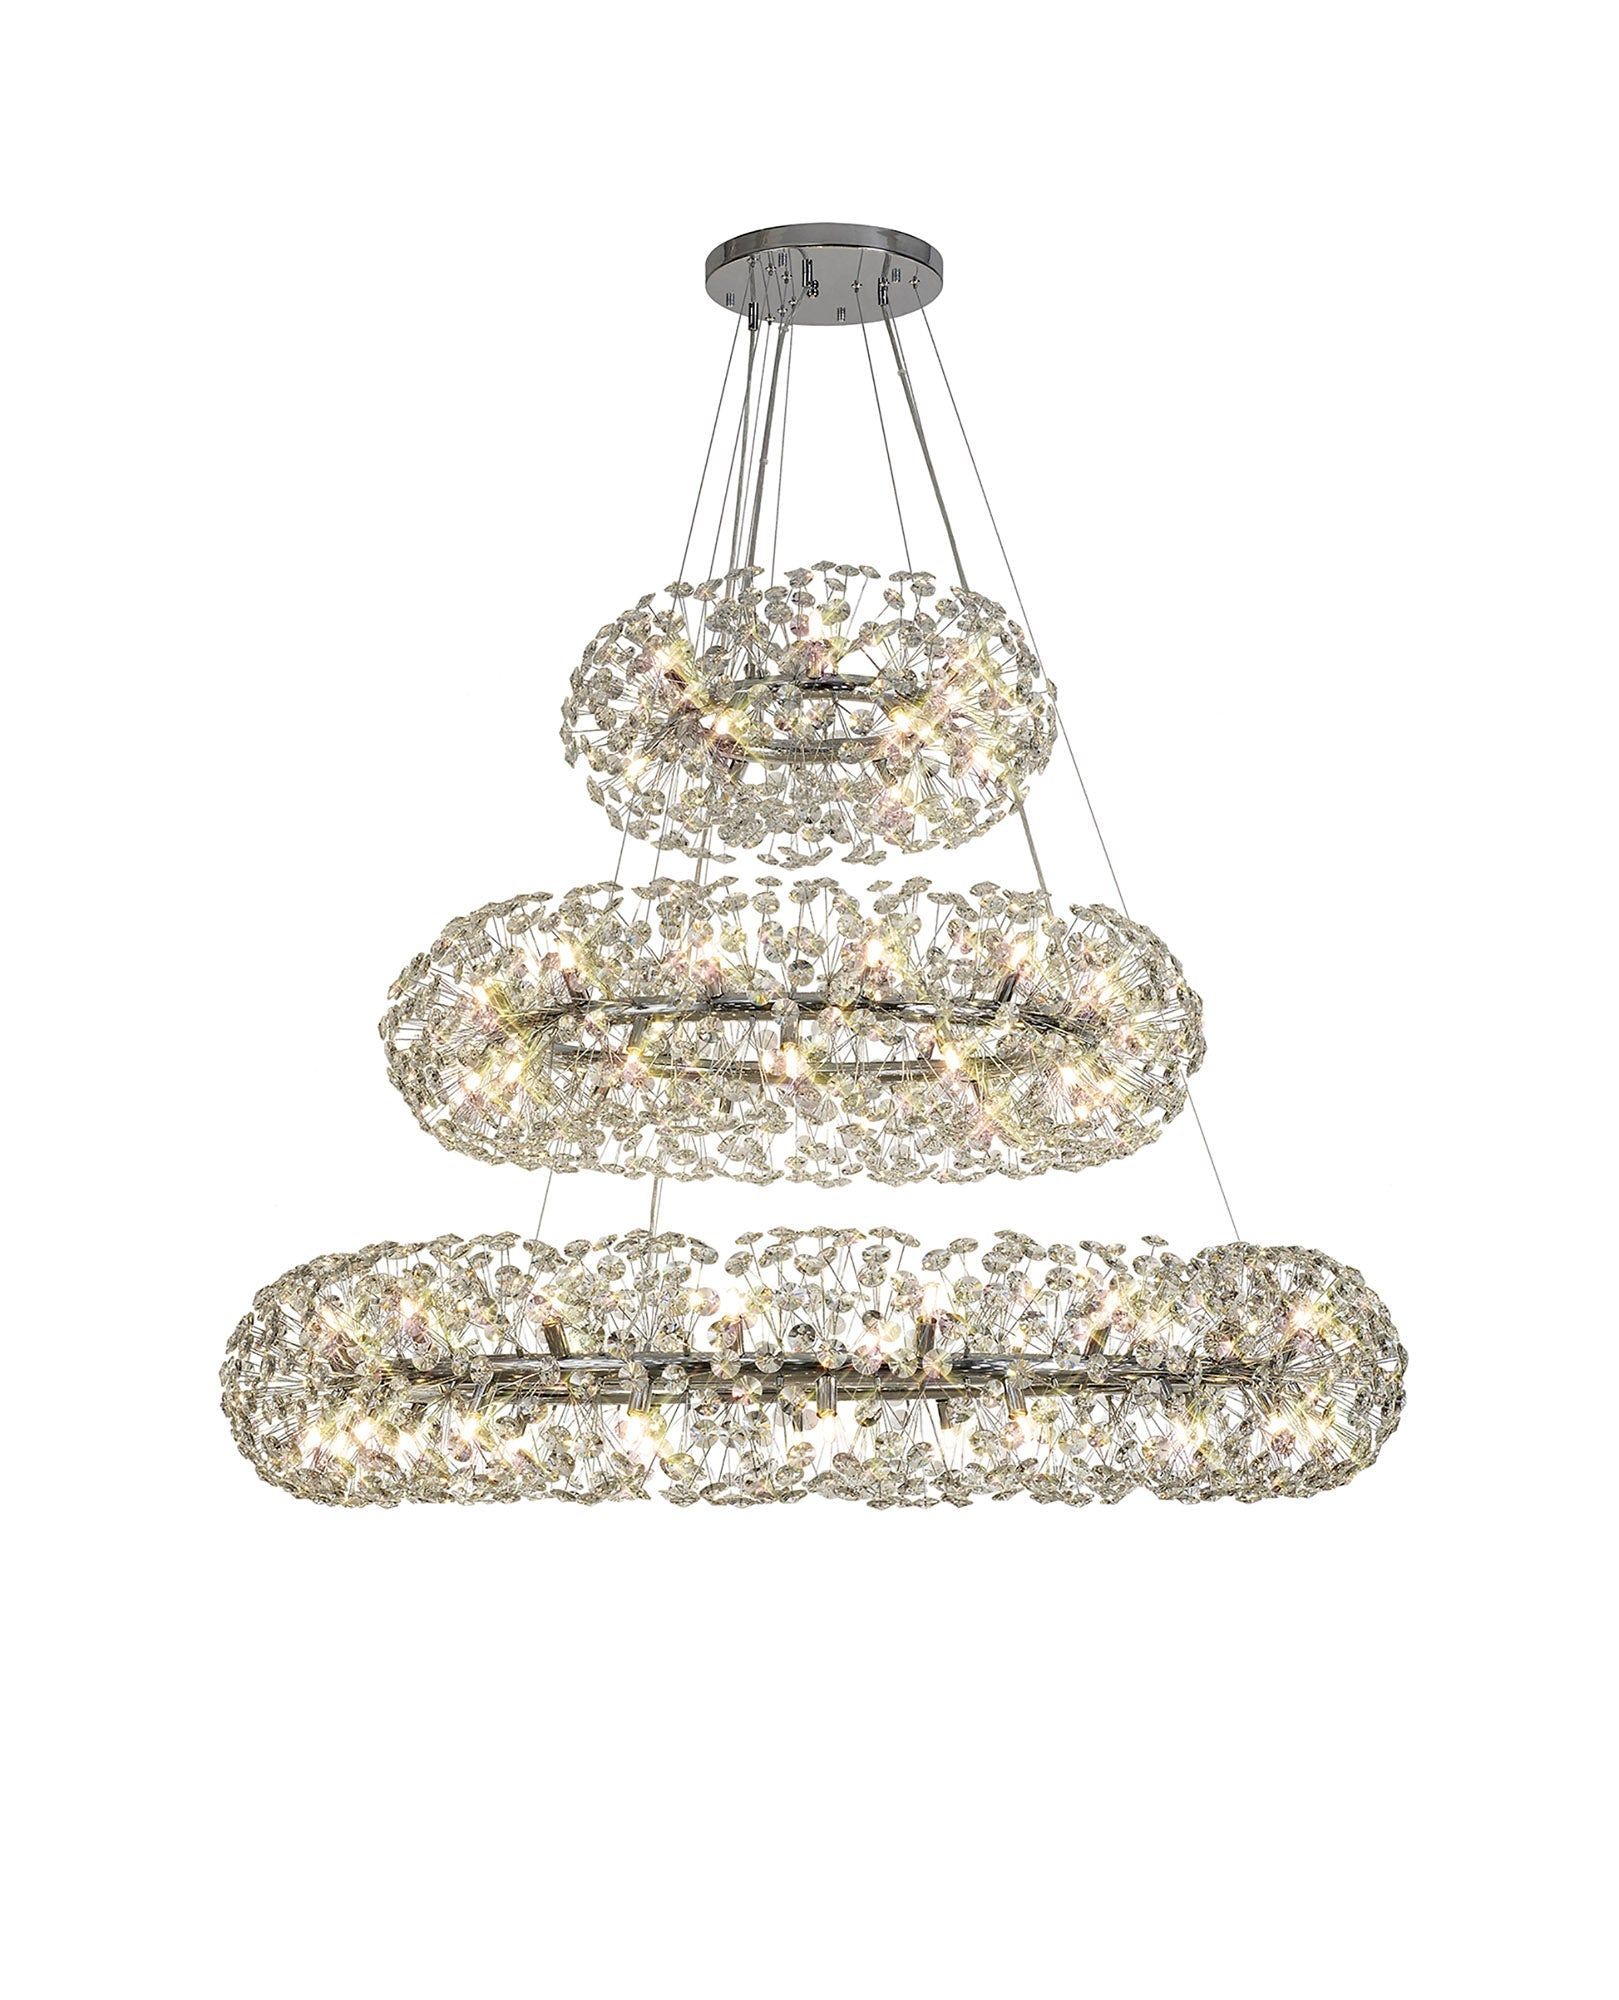 Sophia 3 Tier Pendant 74 Light G9 French Gold/Crystal, Polished Chrome/Crystal, Item Weight: 37.6kg